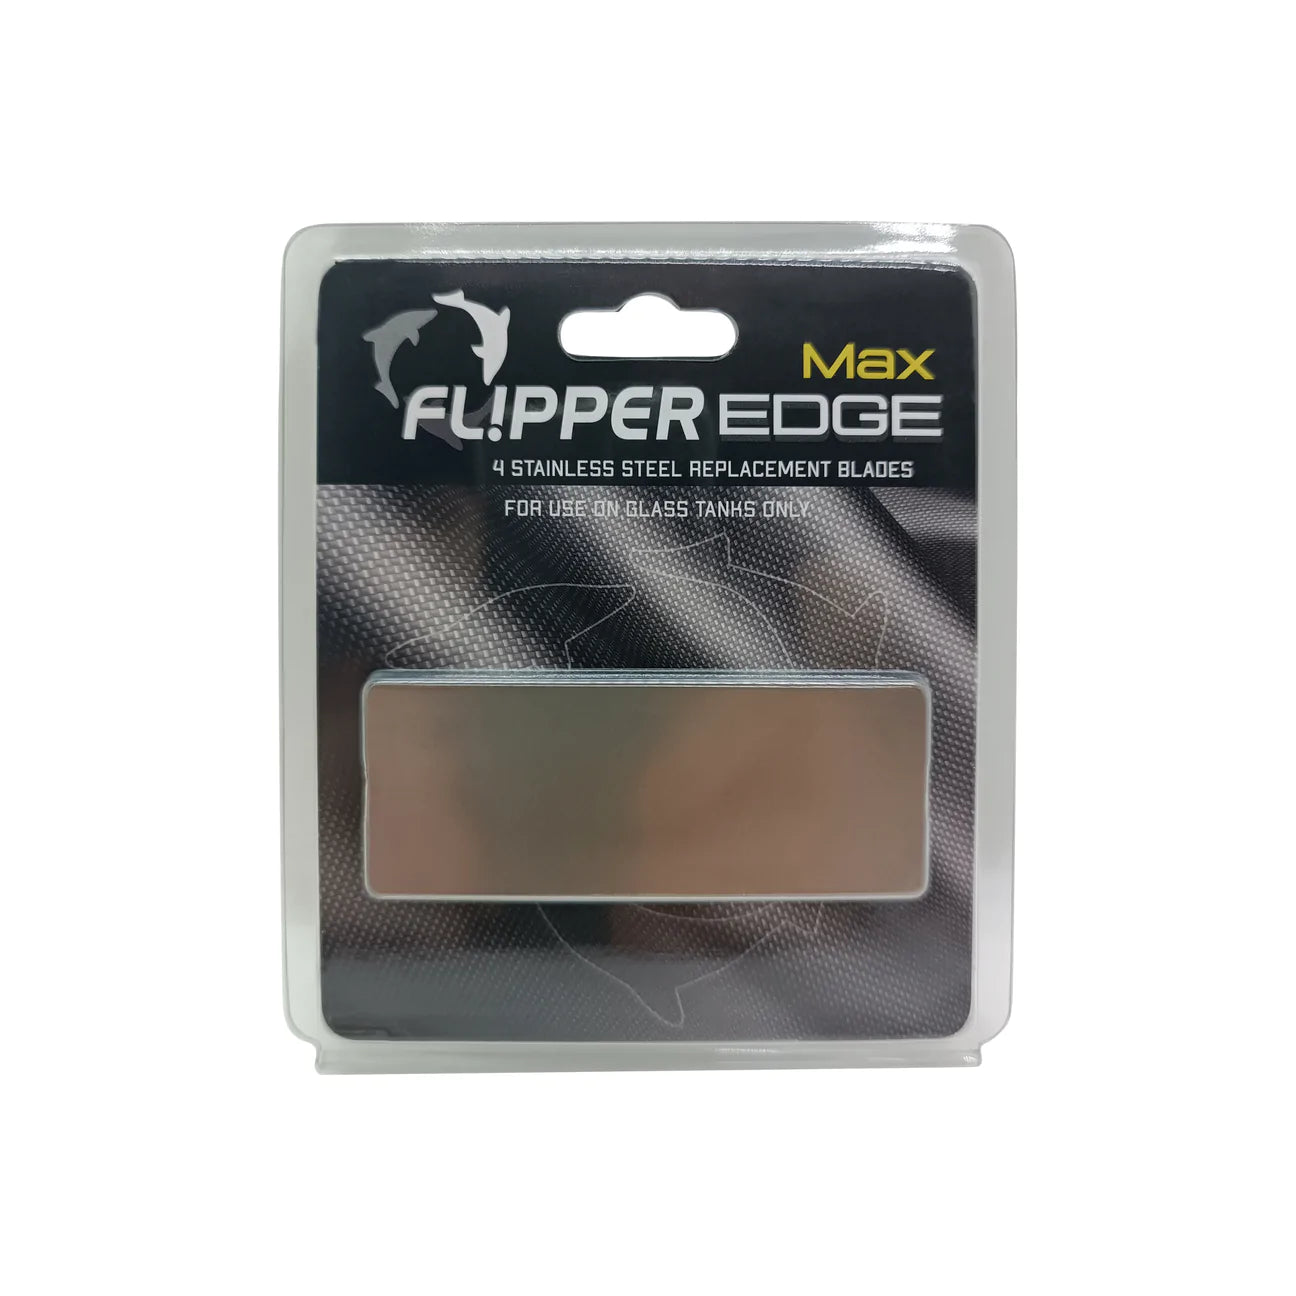 Edge MAX Stainless Steel Blades - 4pk- MAP $19.99